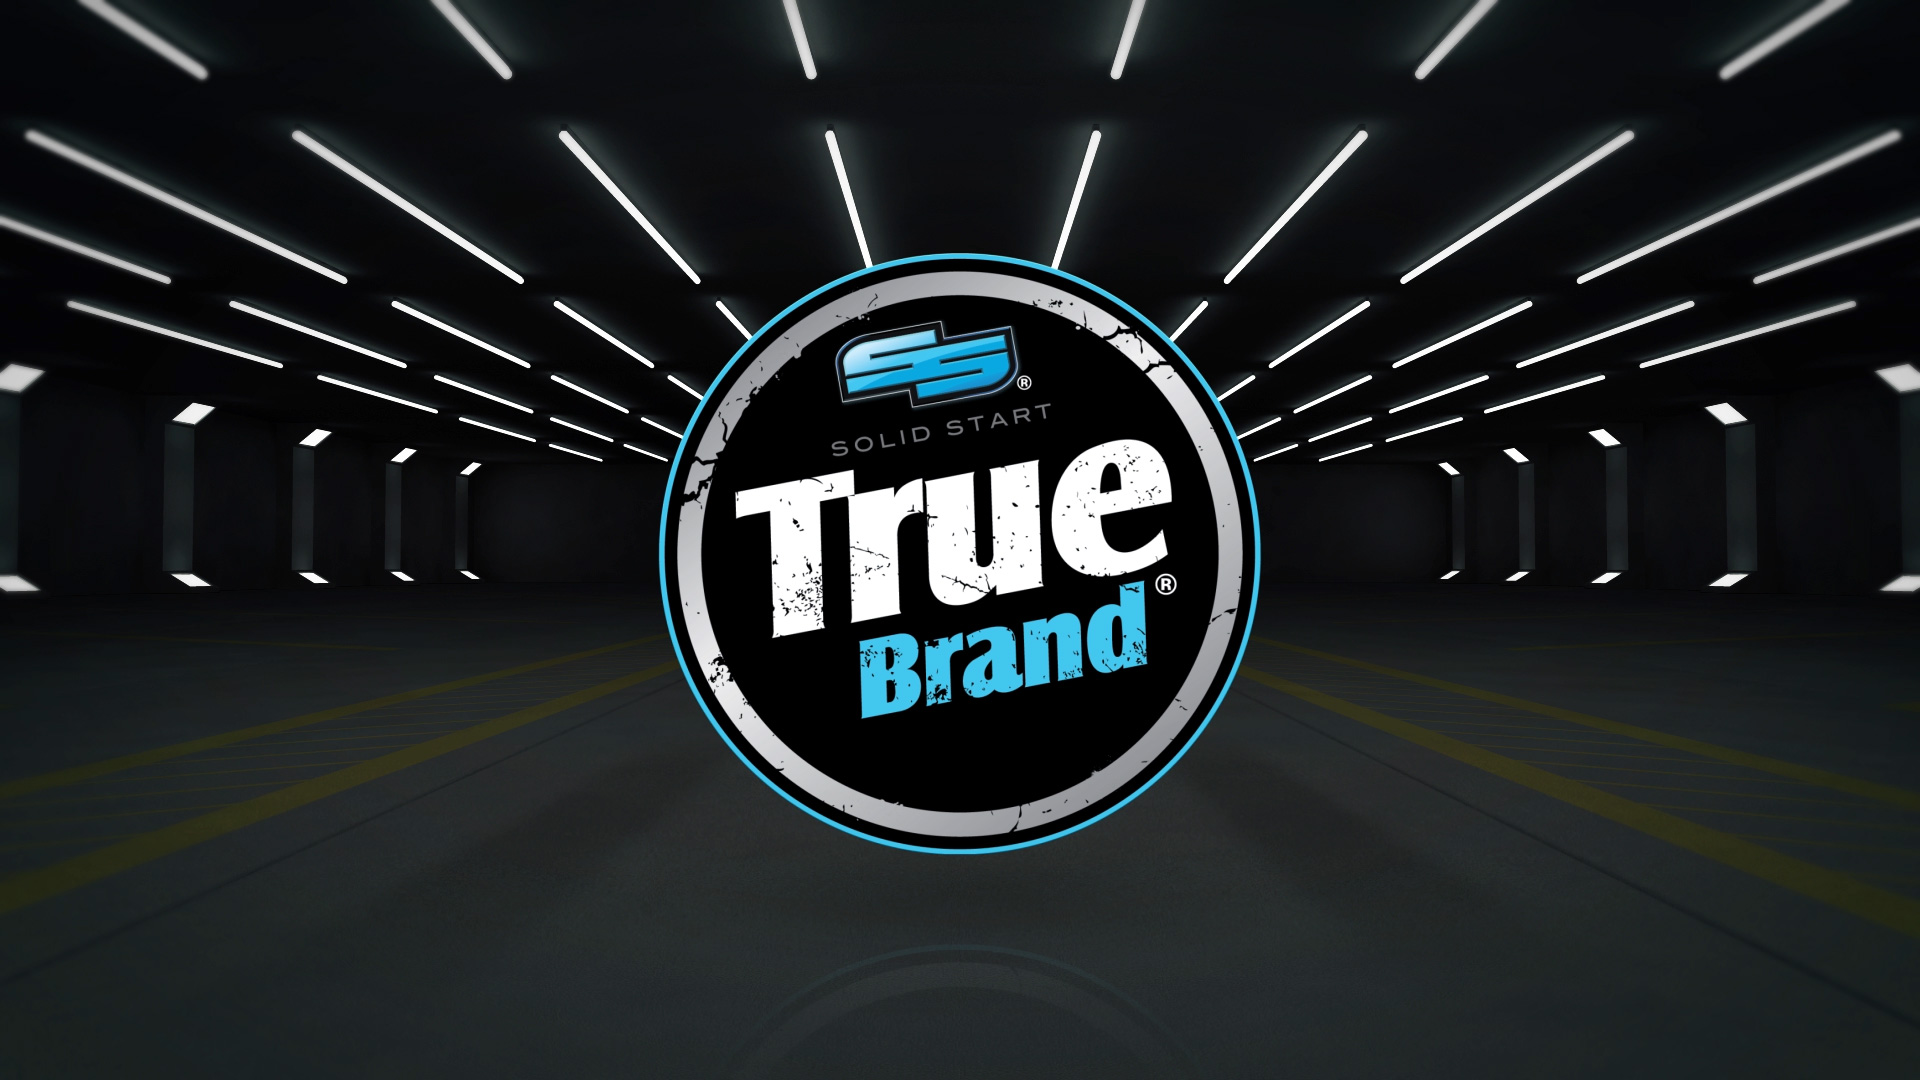 Solid Start manufactures the True Brand family of automotive